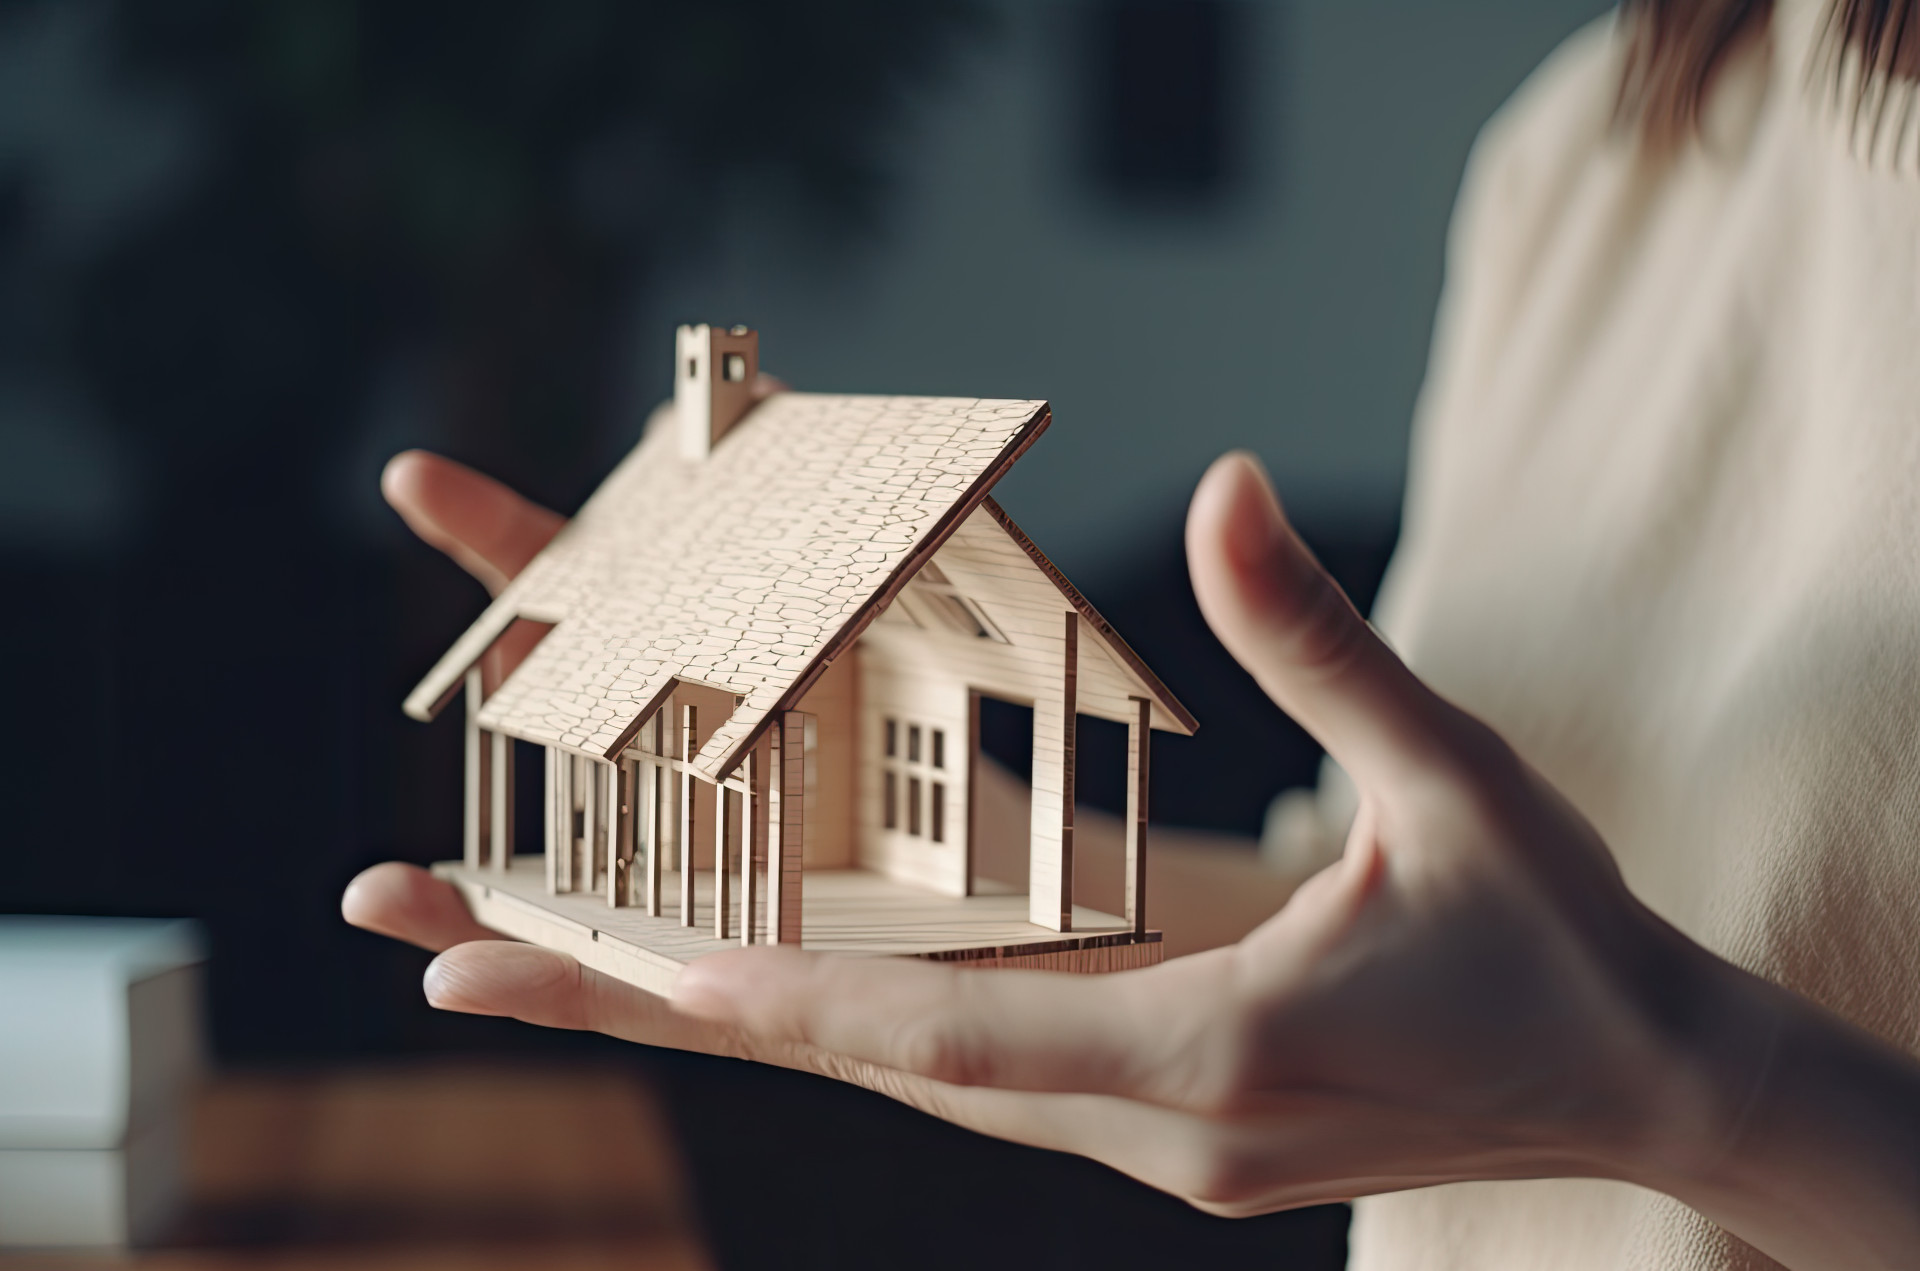 Person holding a model wooden house